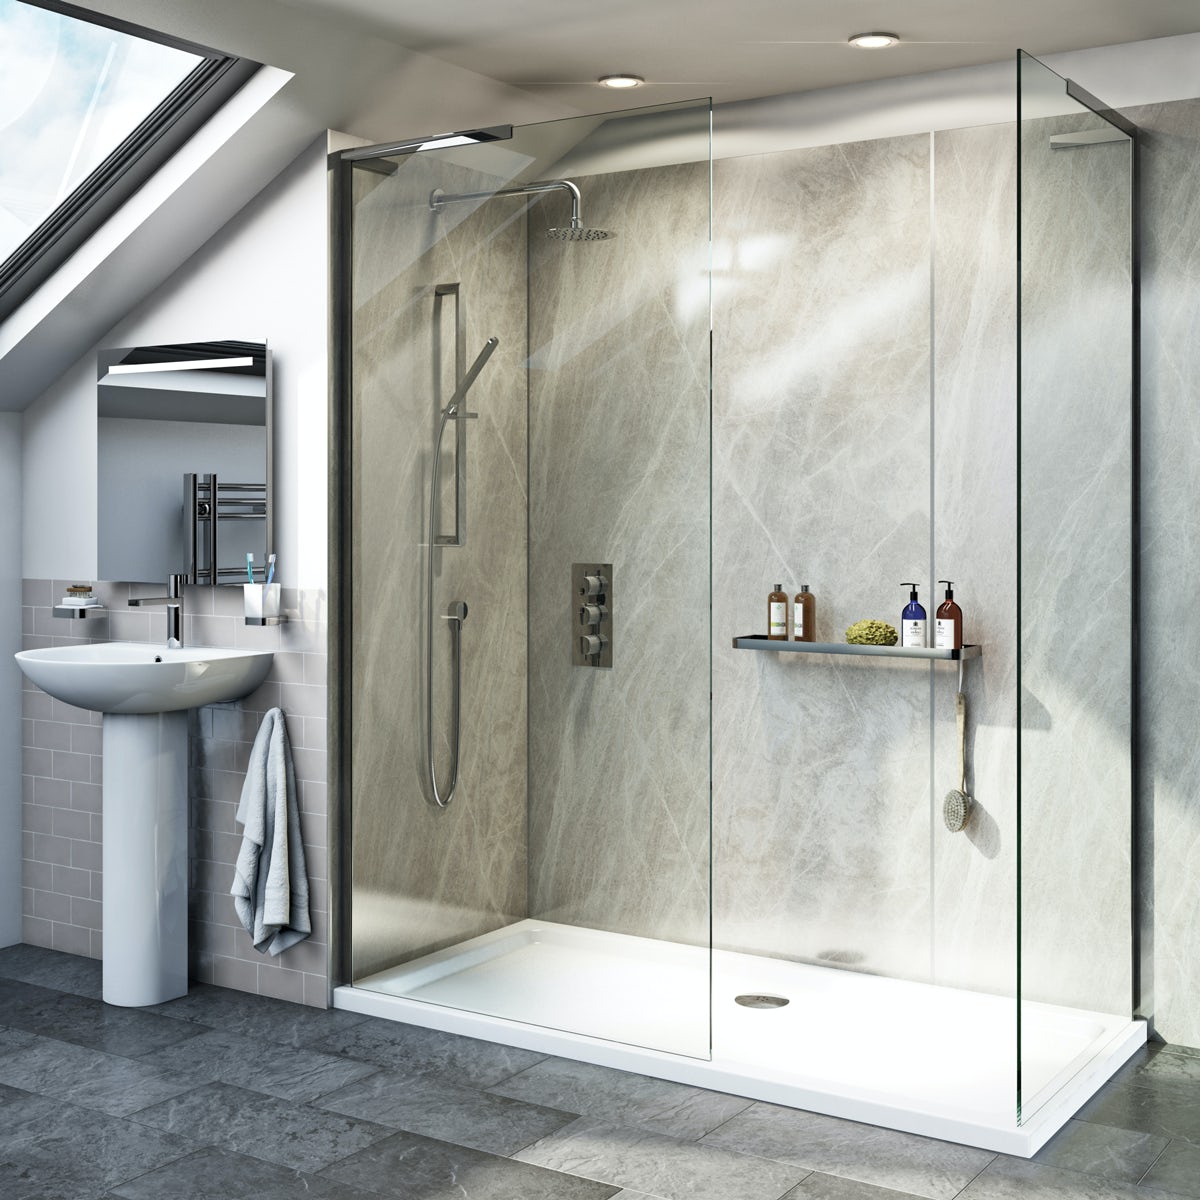 5 Benefits Of Installing A Walk In Shower Residence Style